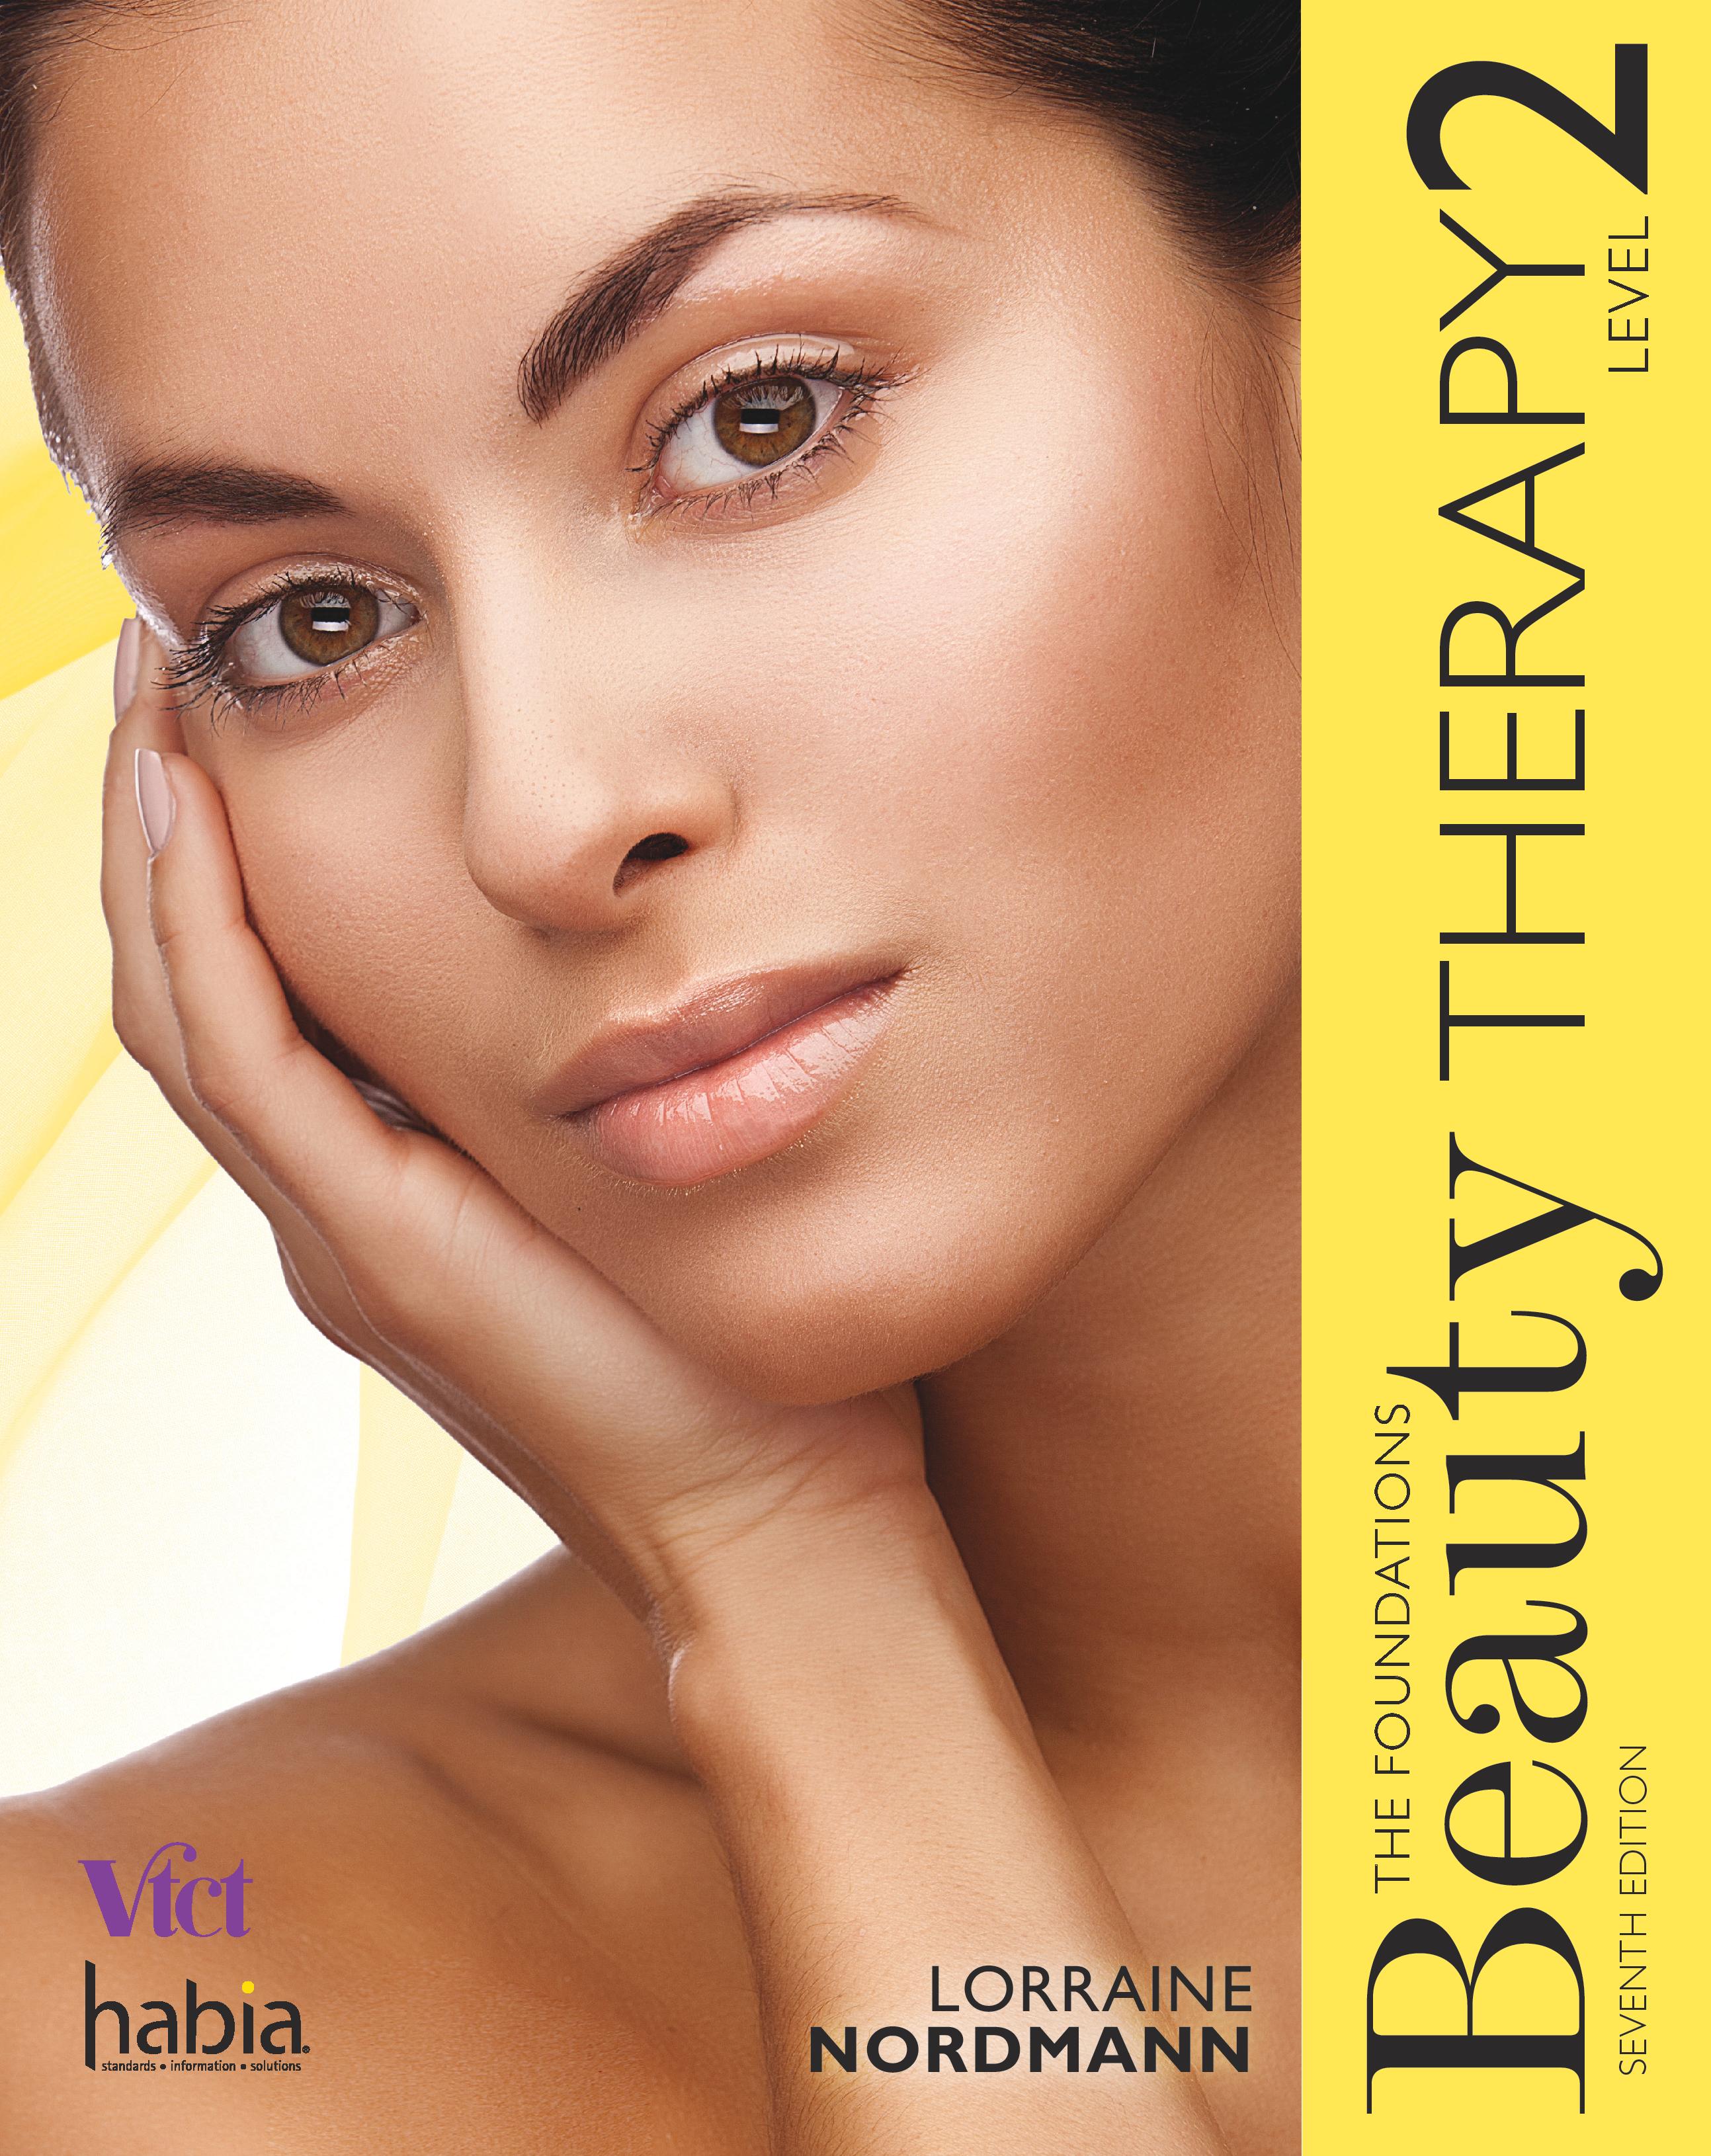 Form 001 - Level 2 Beauty Therapy